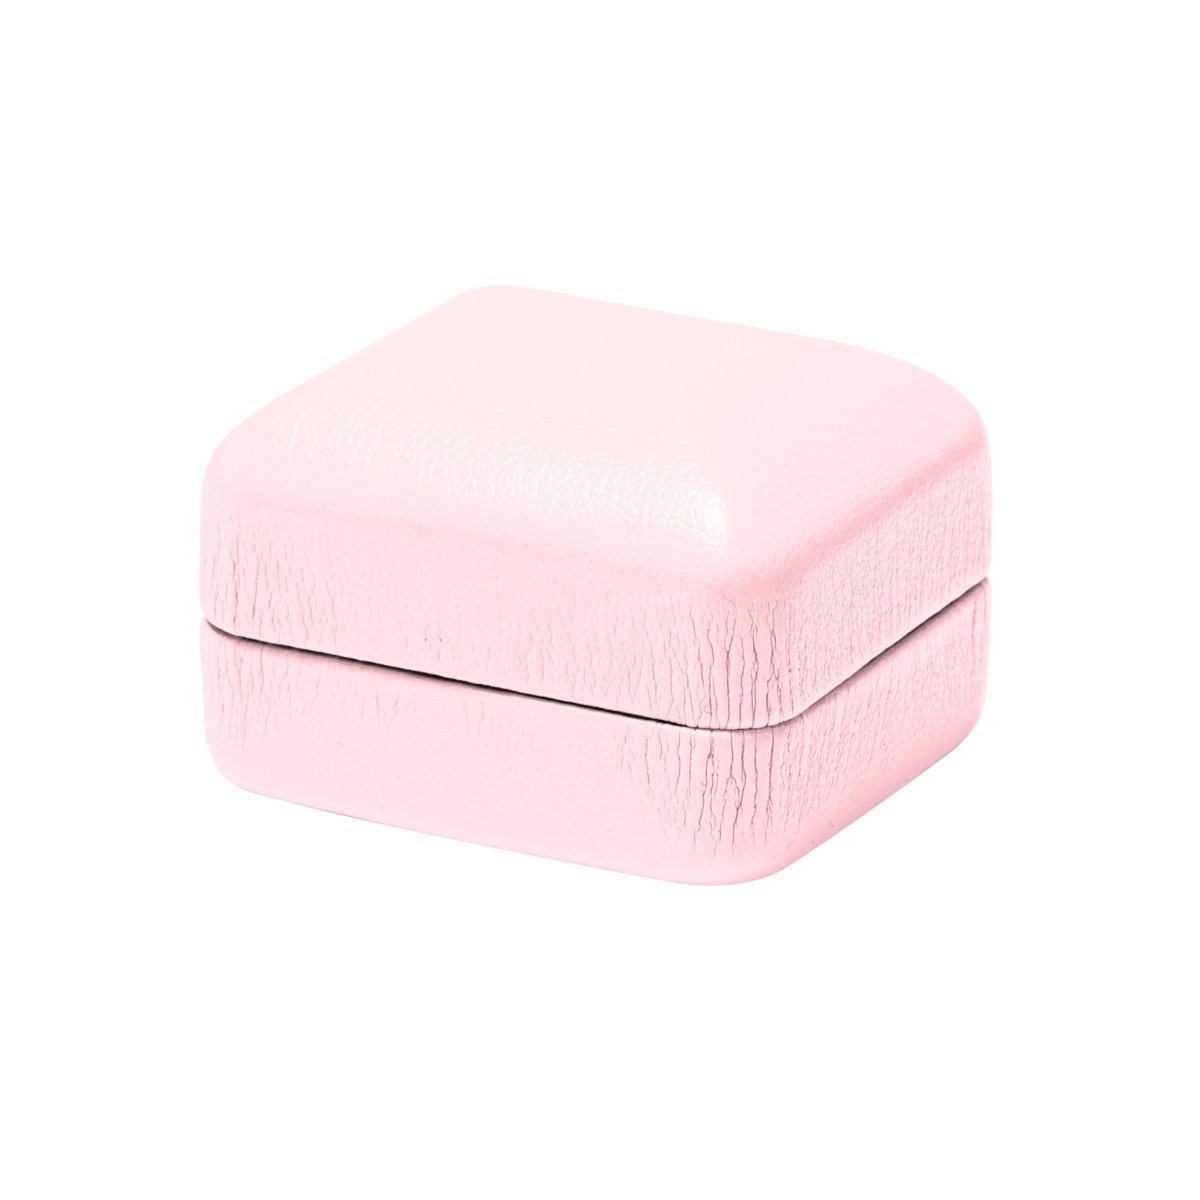 Vibrant Leatherette Tie Tack Box - Prestige and Fancy - Pink Leatherette